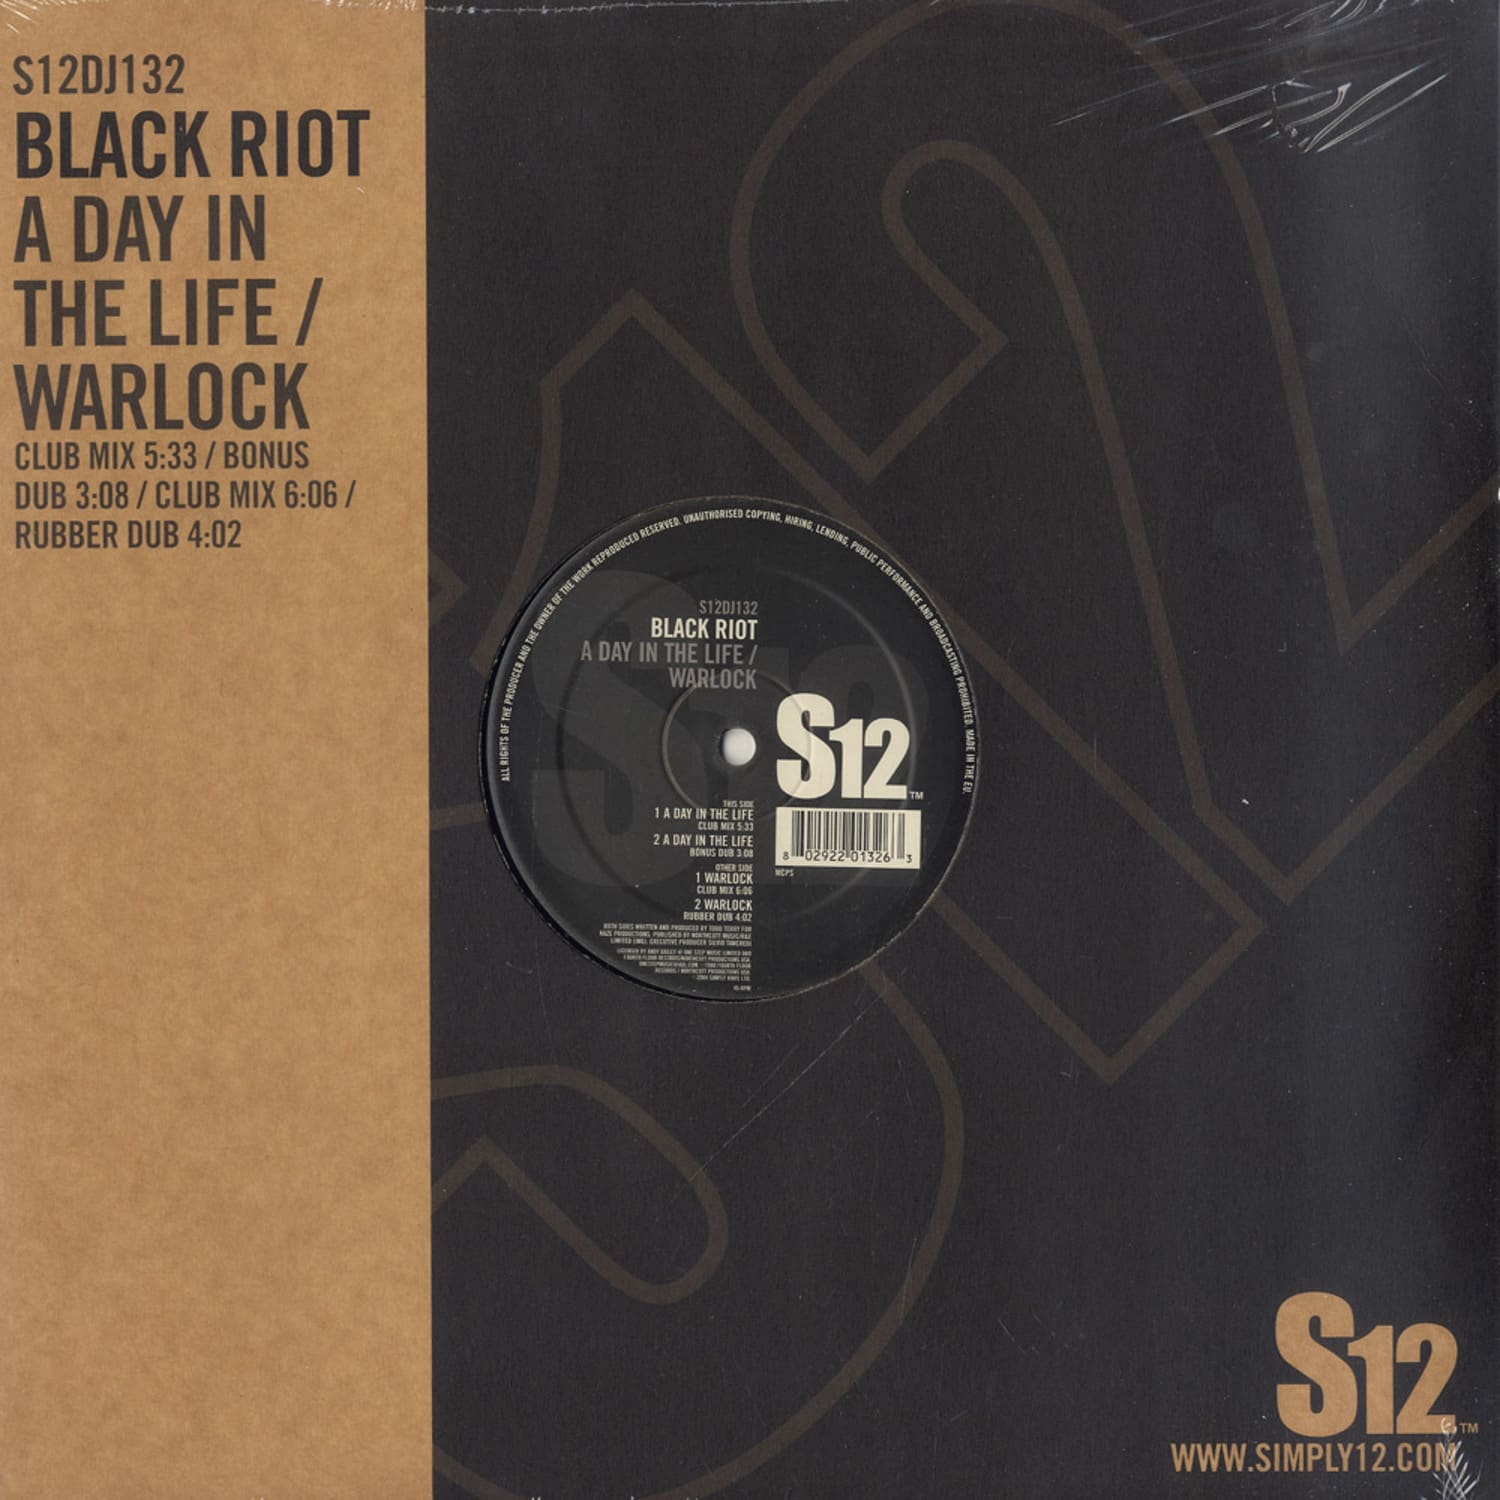 Black Riot - A DAY IN A LIFE